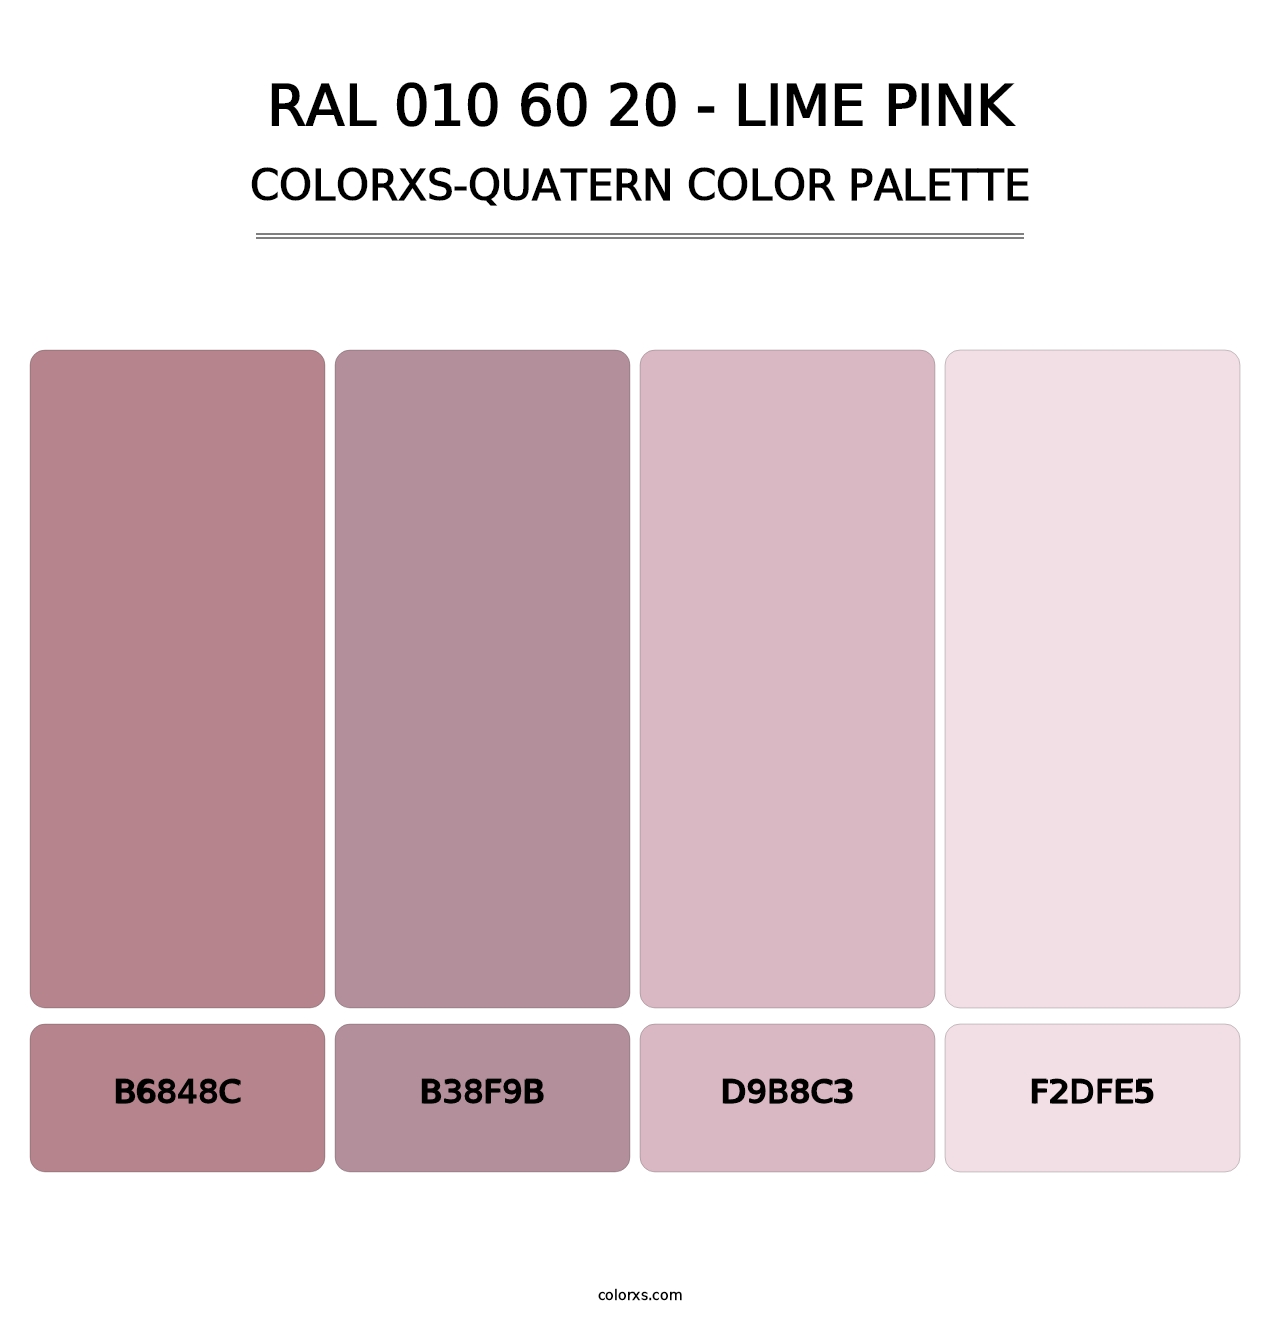 RAL 010 60 20 - Lime Pink - Colorxs Quatern Palette